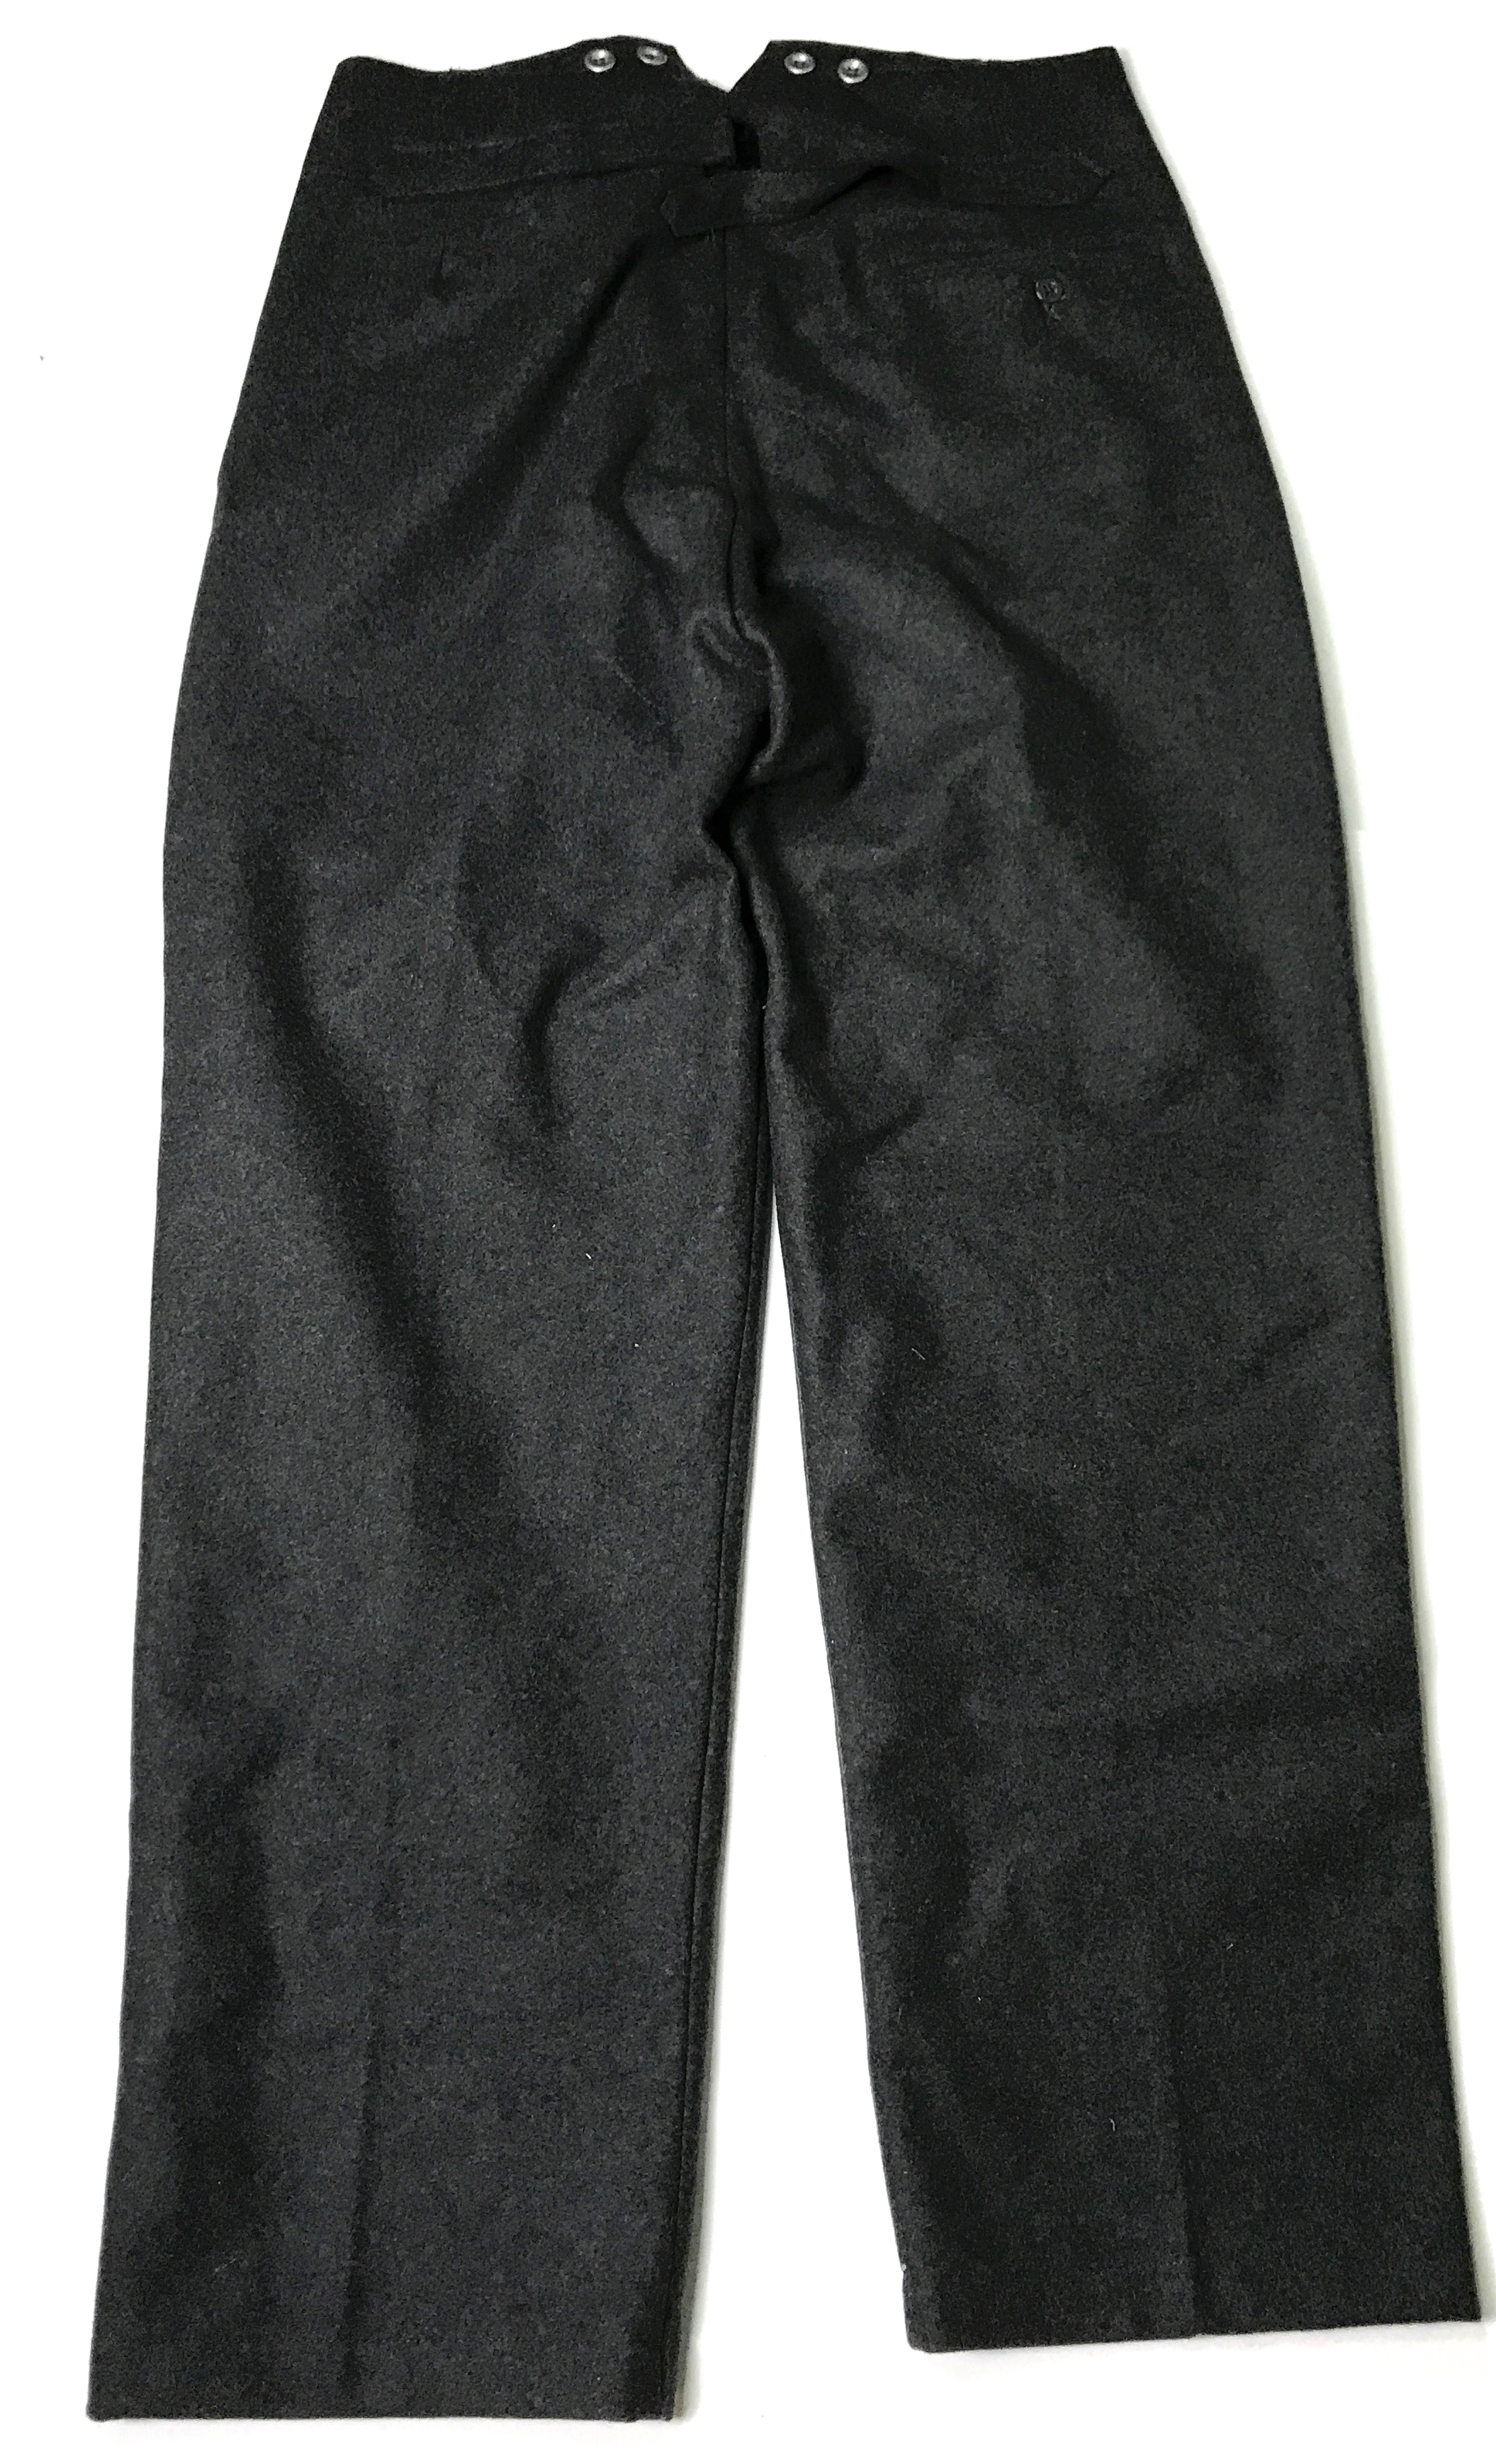 M37 COMBAT FIELD TROUSERS-STONE GREY | Man The Line